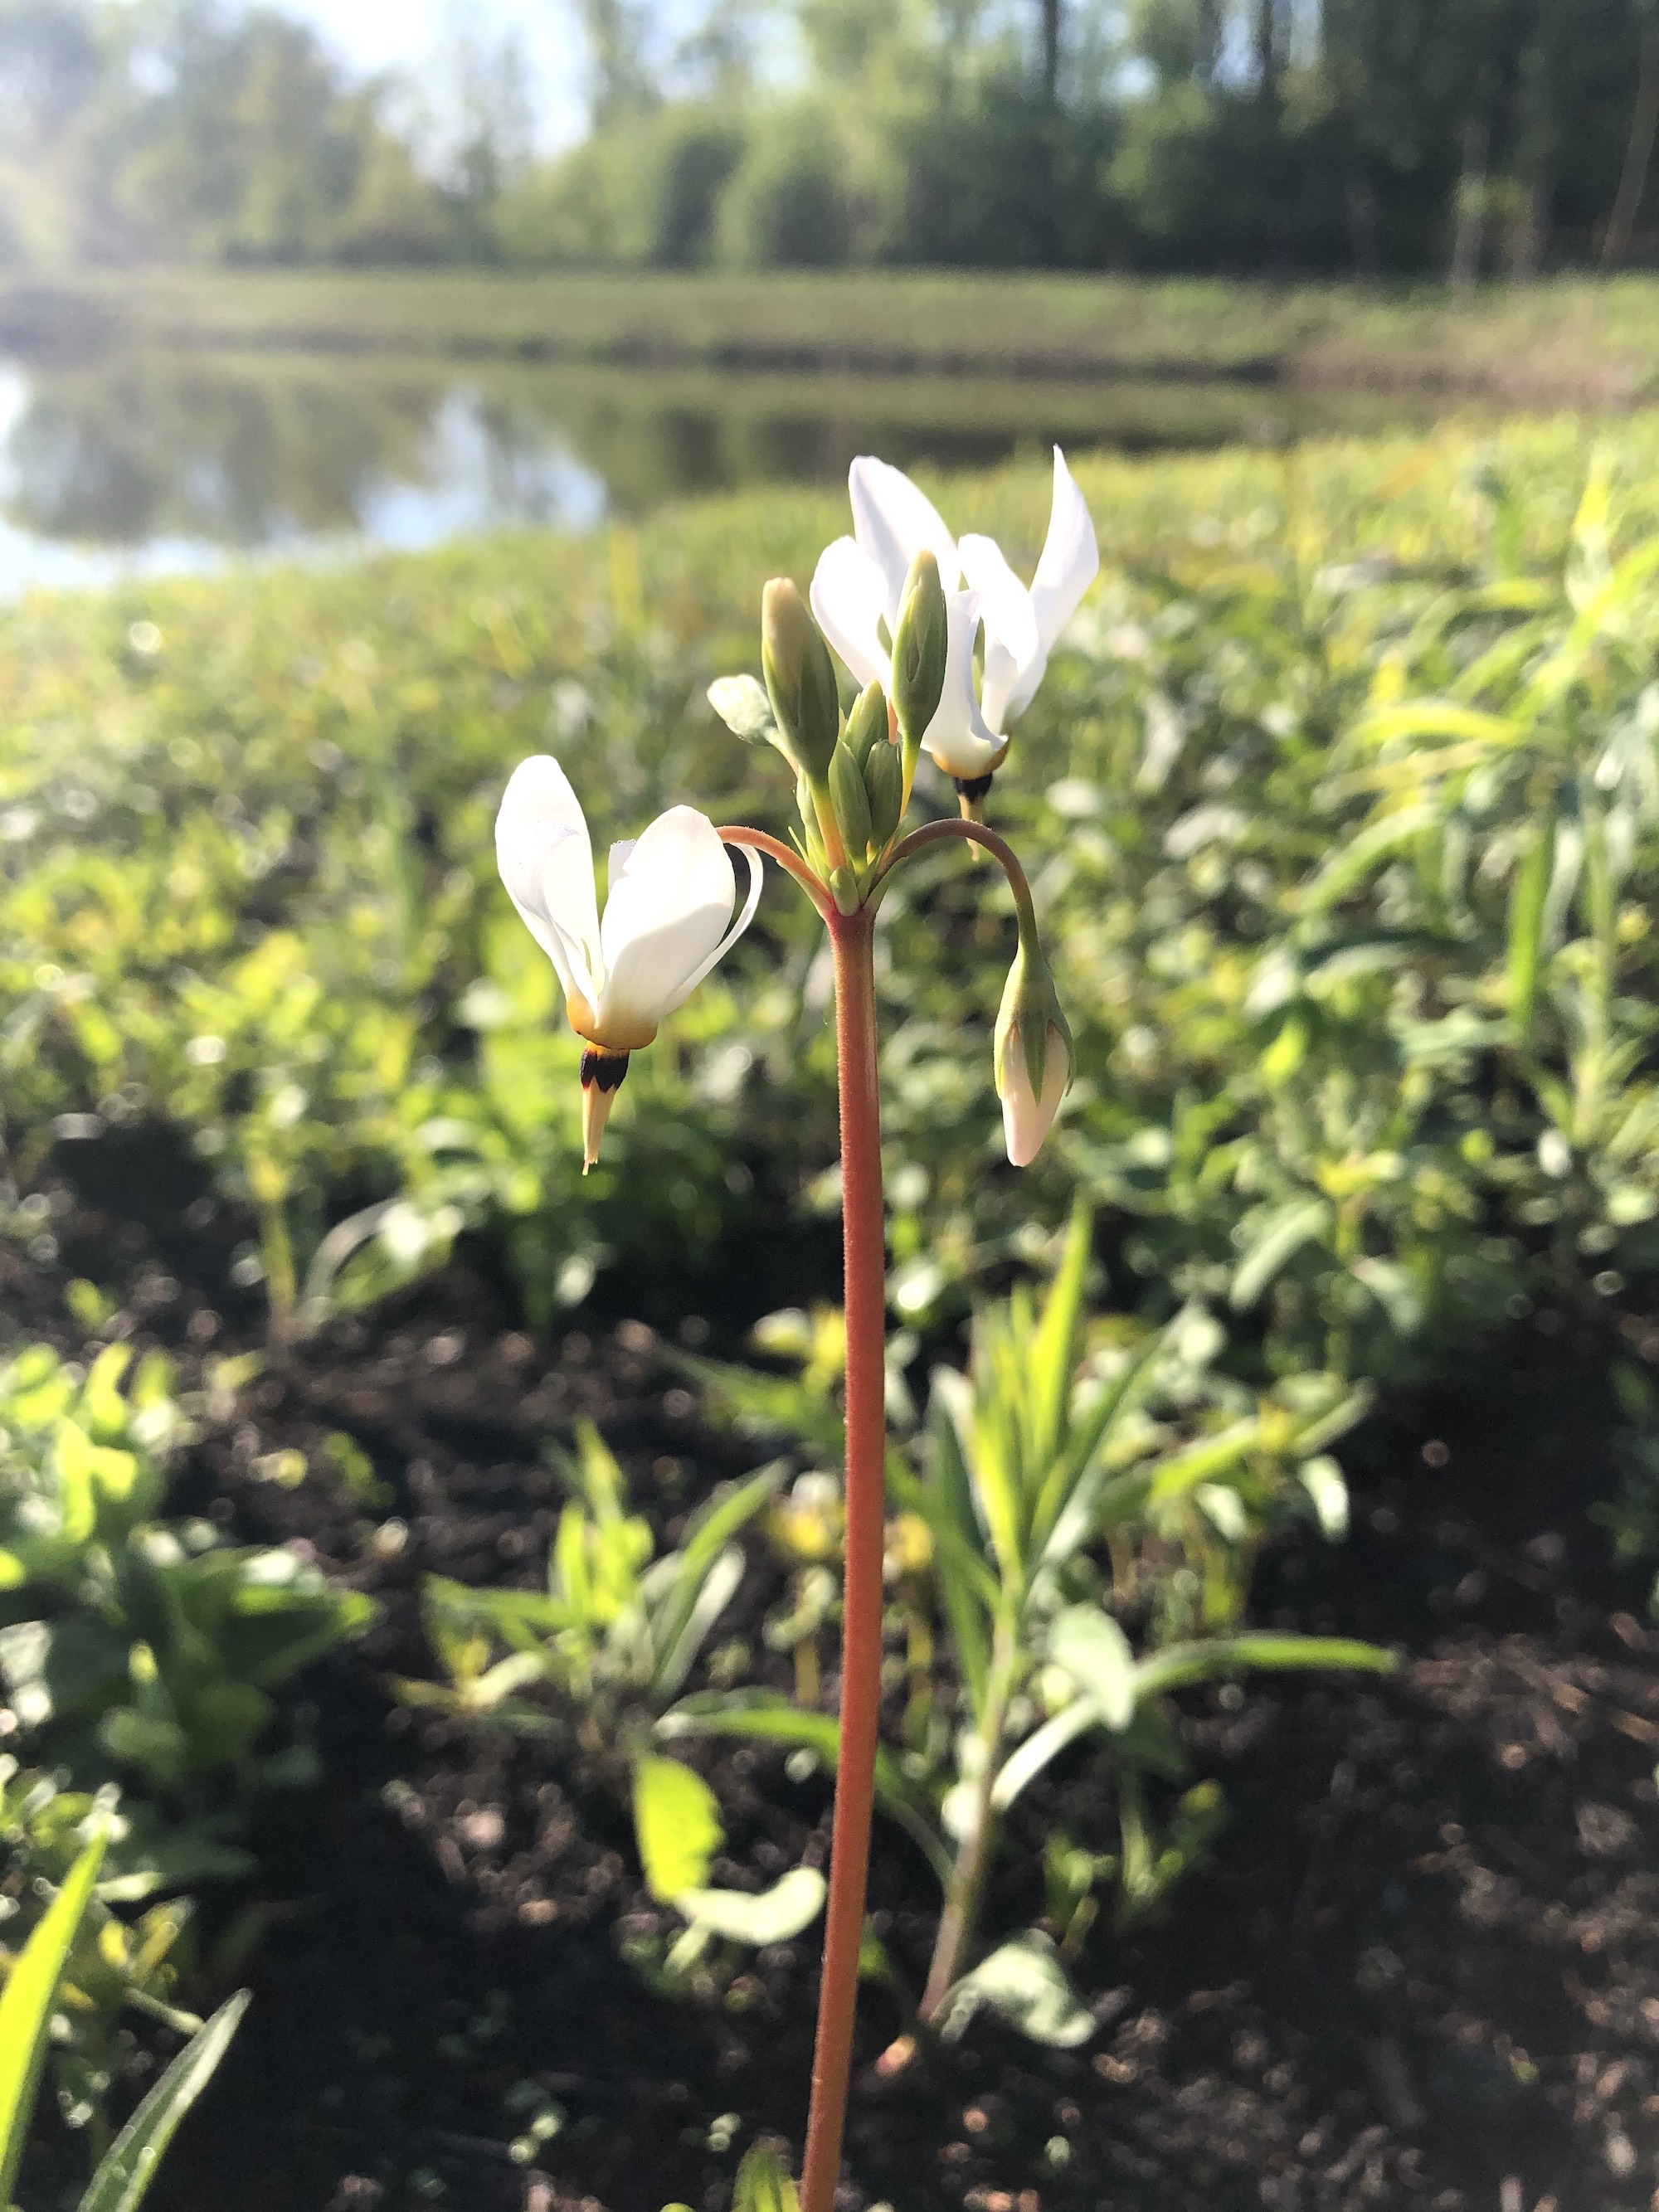 Shooting Star on bank of retaining pond on May 8, 2021.